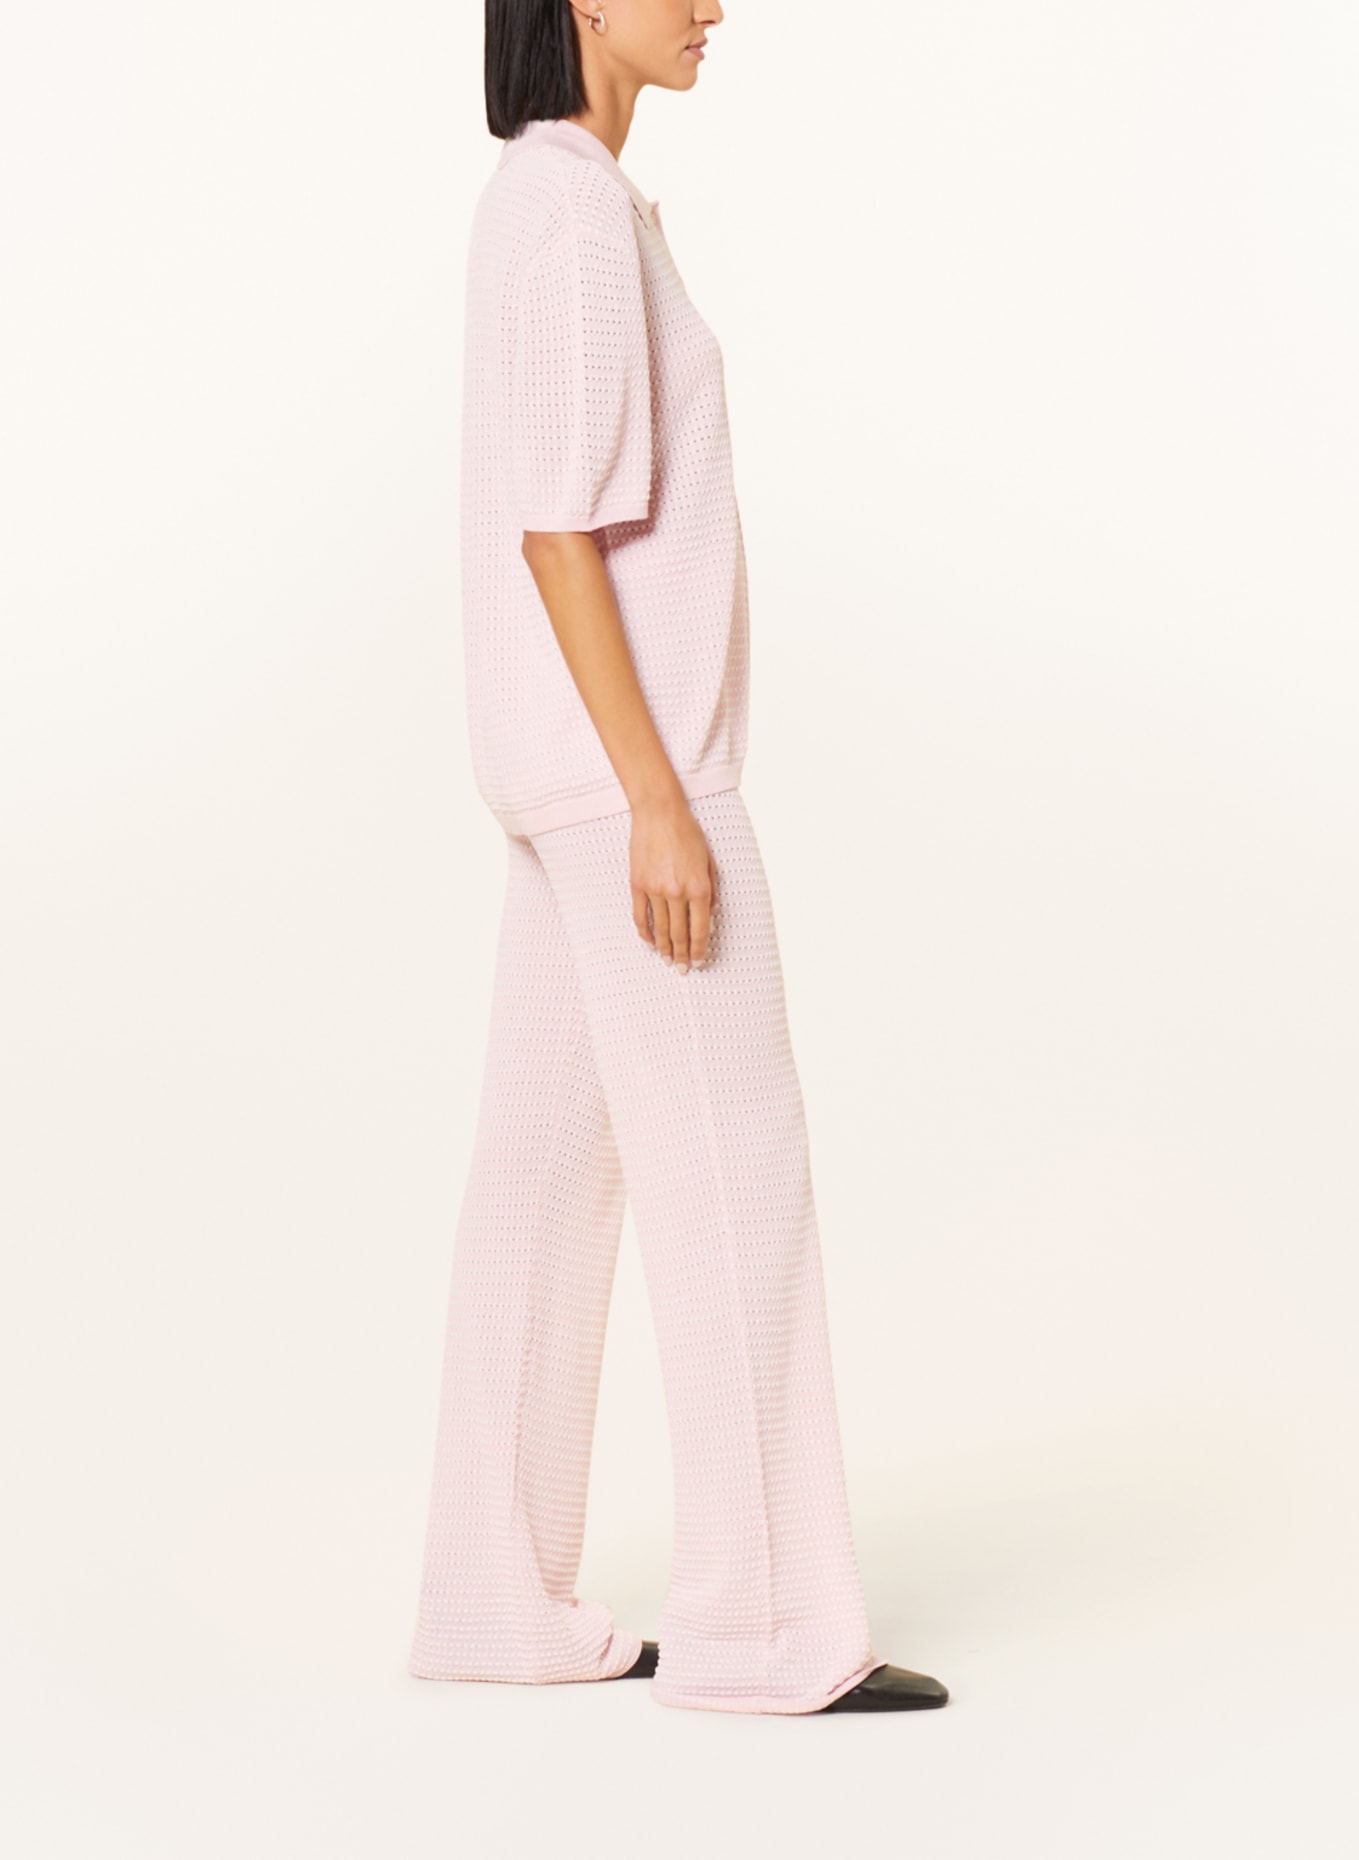 REMAIN Knit trousers, Color: LIGHT PINK/ WHITE (Image 4)